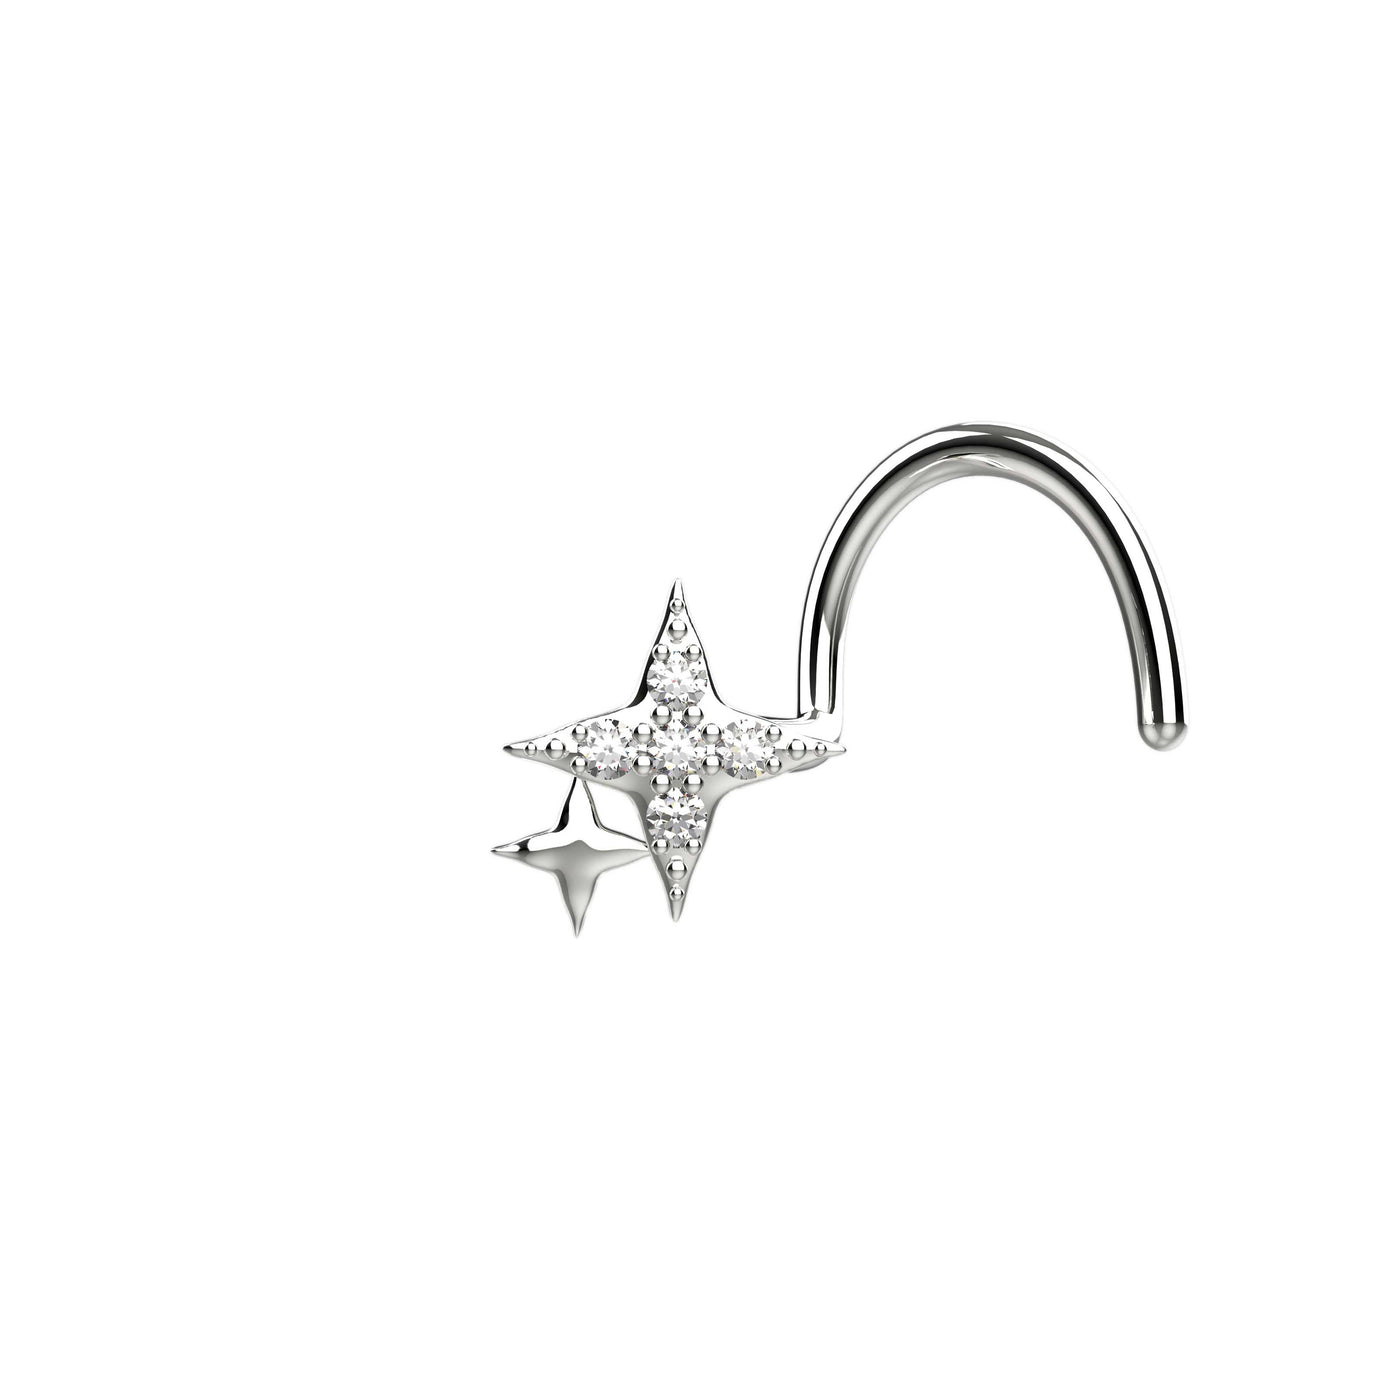 Nose ring silver with cz gems 